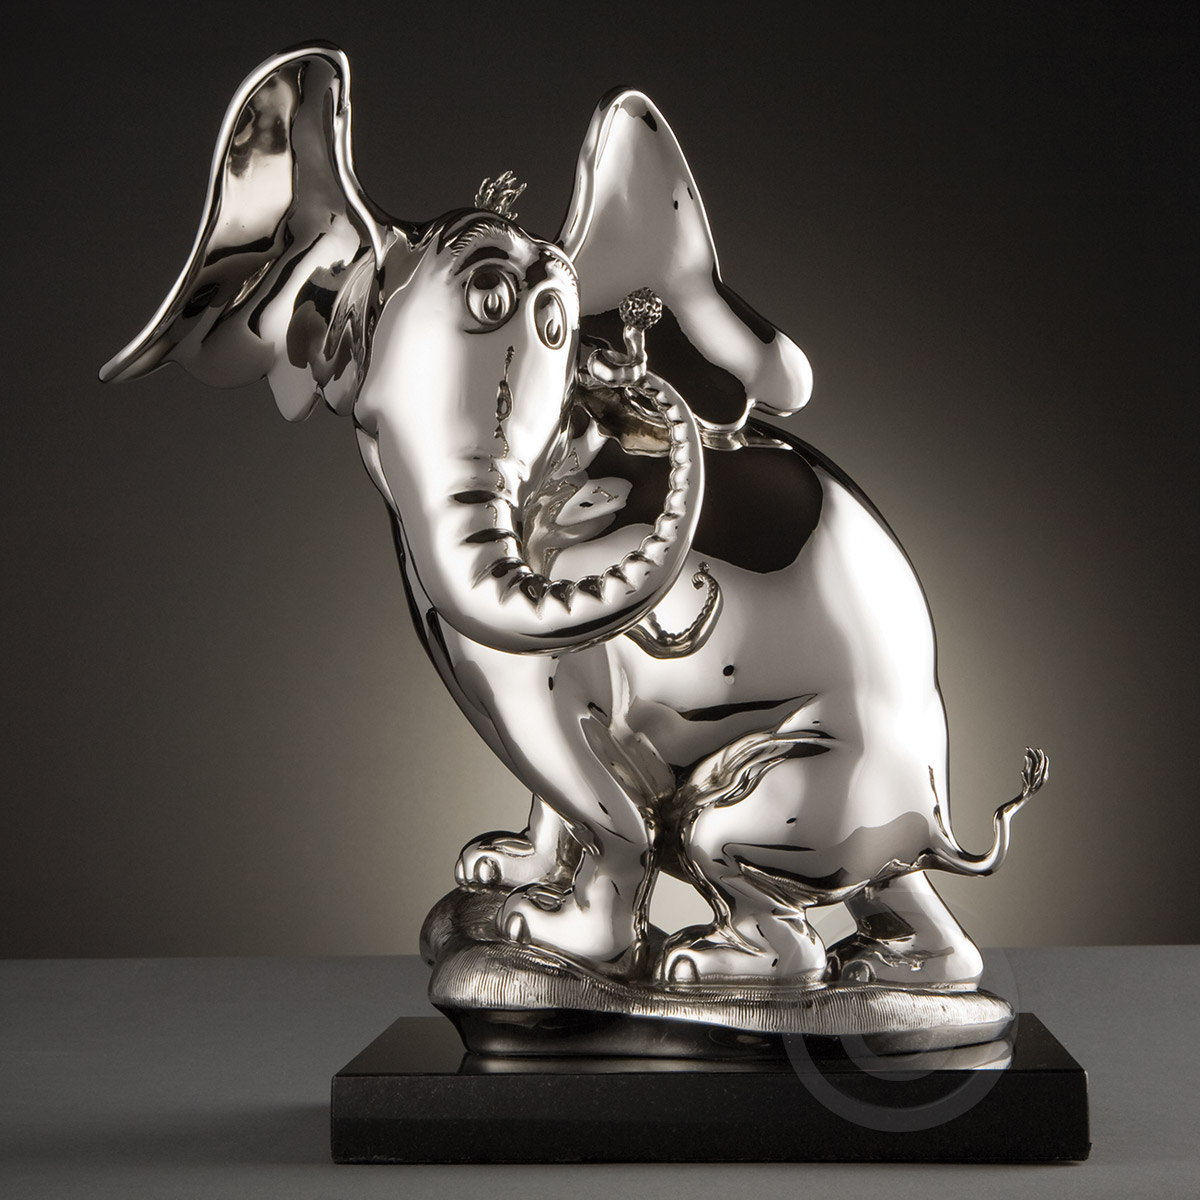 Horton Hears a Who - Maquette, Stainless Steel Sculpture by Dr Seuss